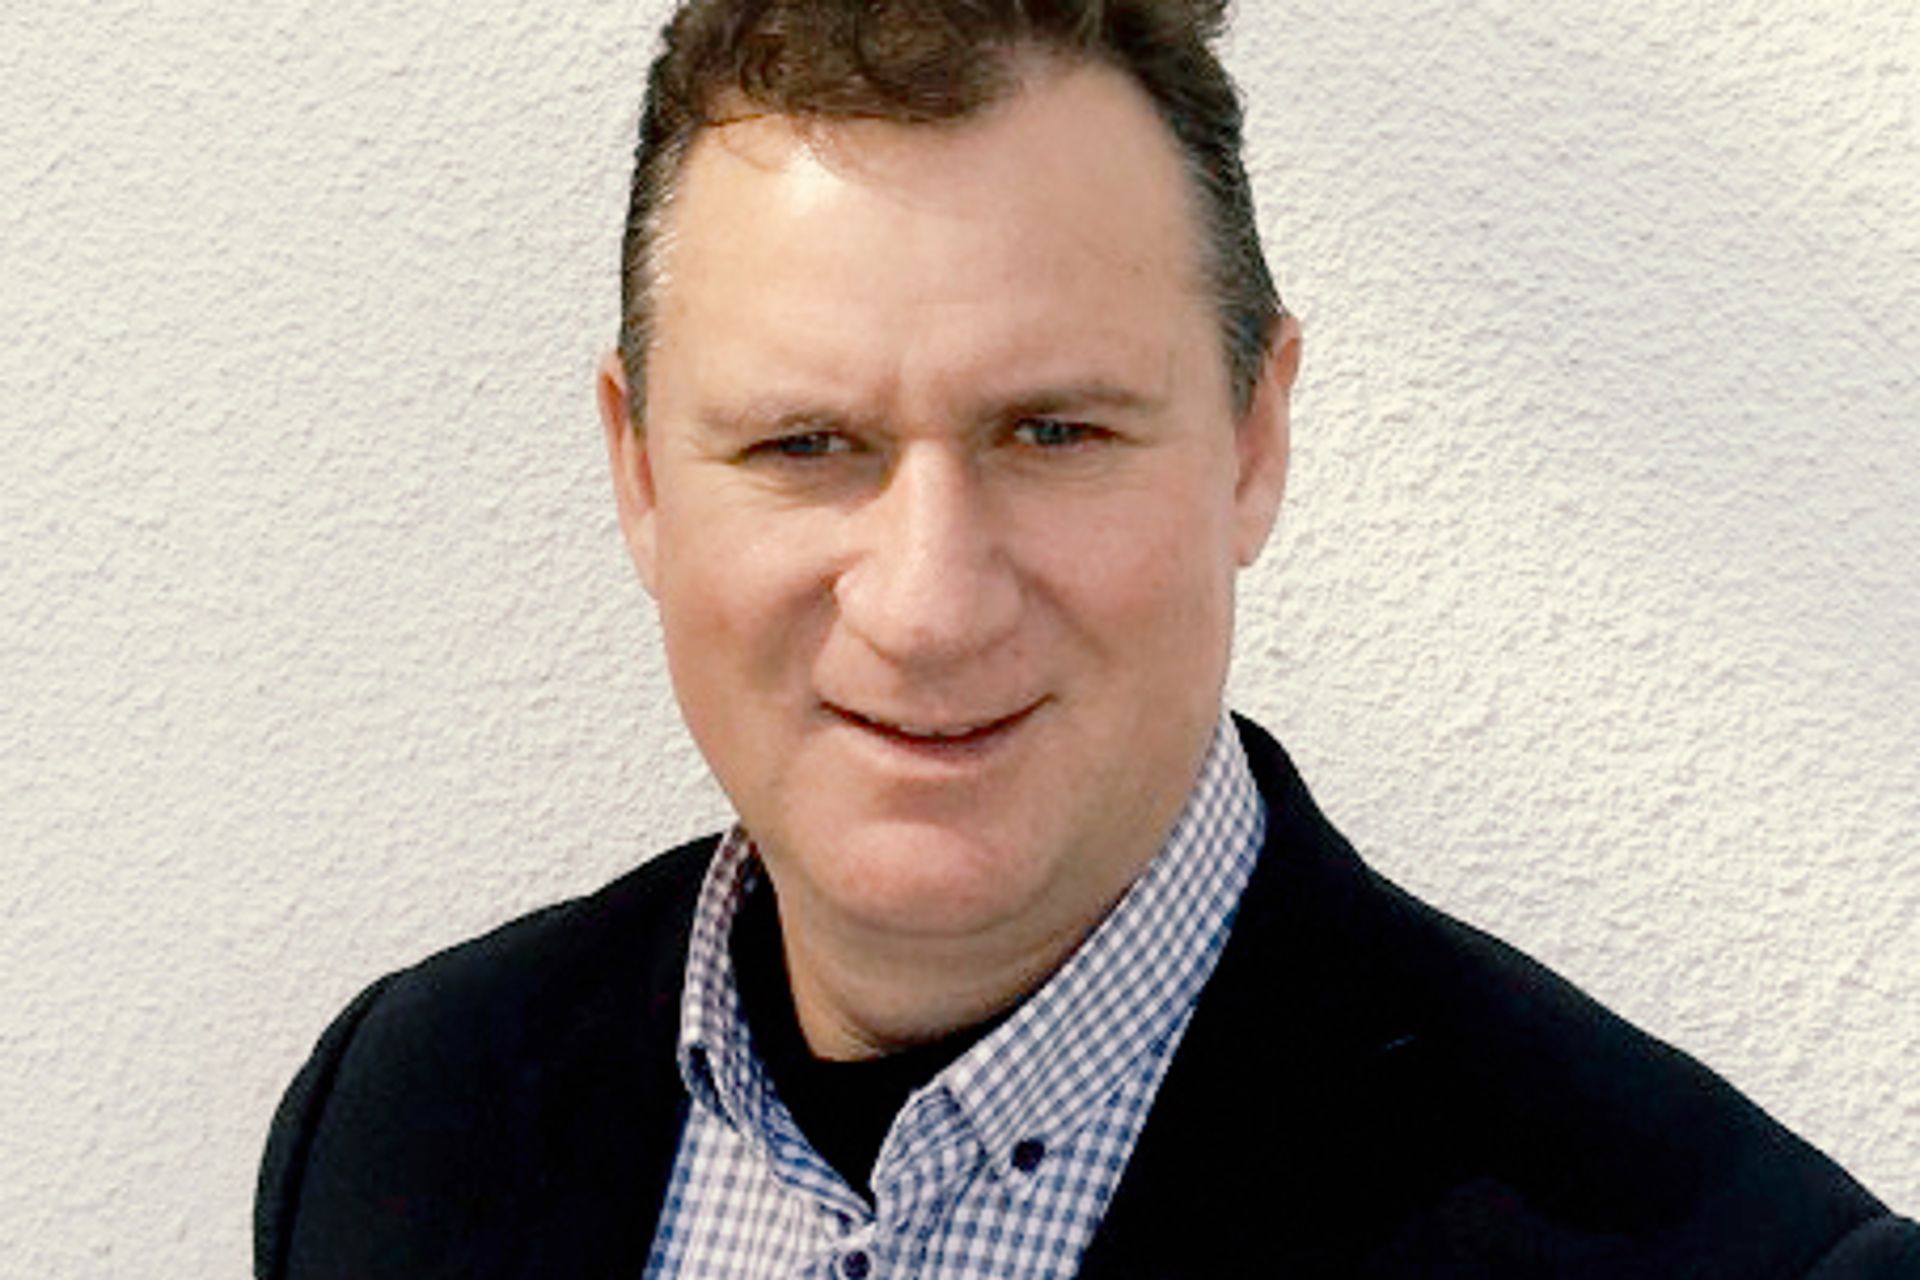 David van Graan, Head of Special Sales Projects at
MAN Automotive in South Africa